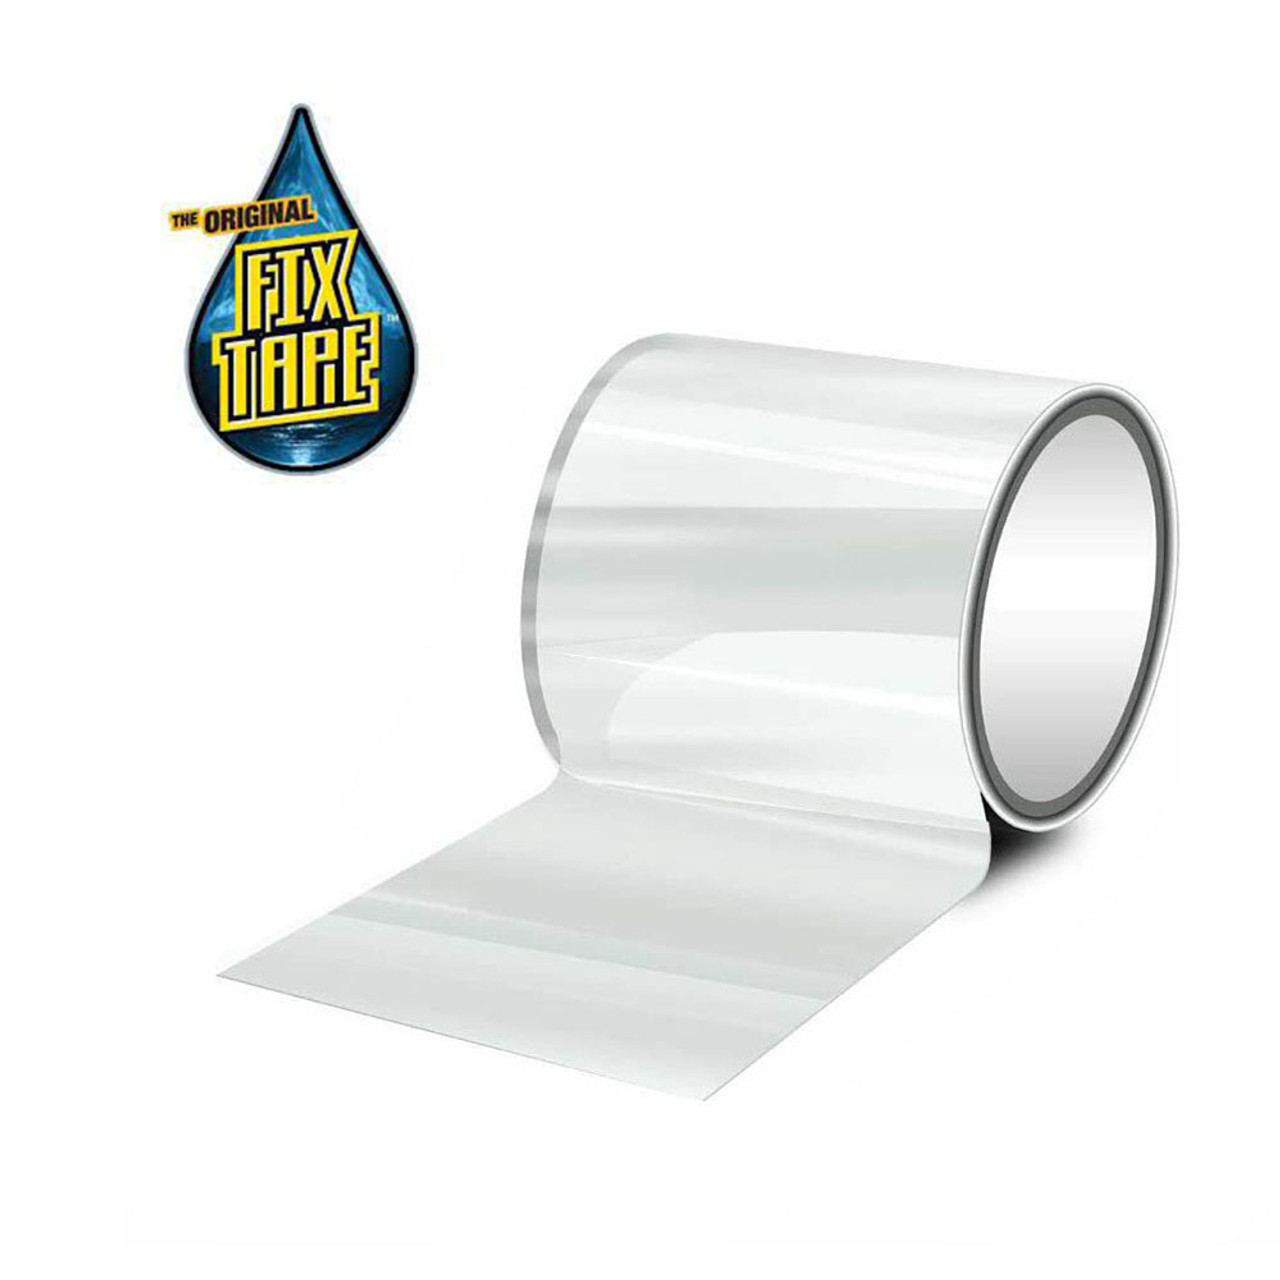 The Original Fix Tape (2-Pack) product image